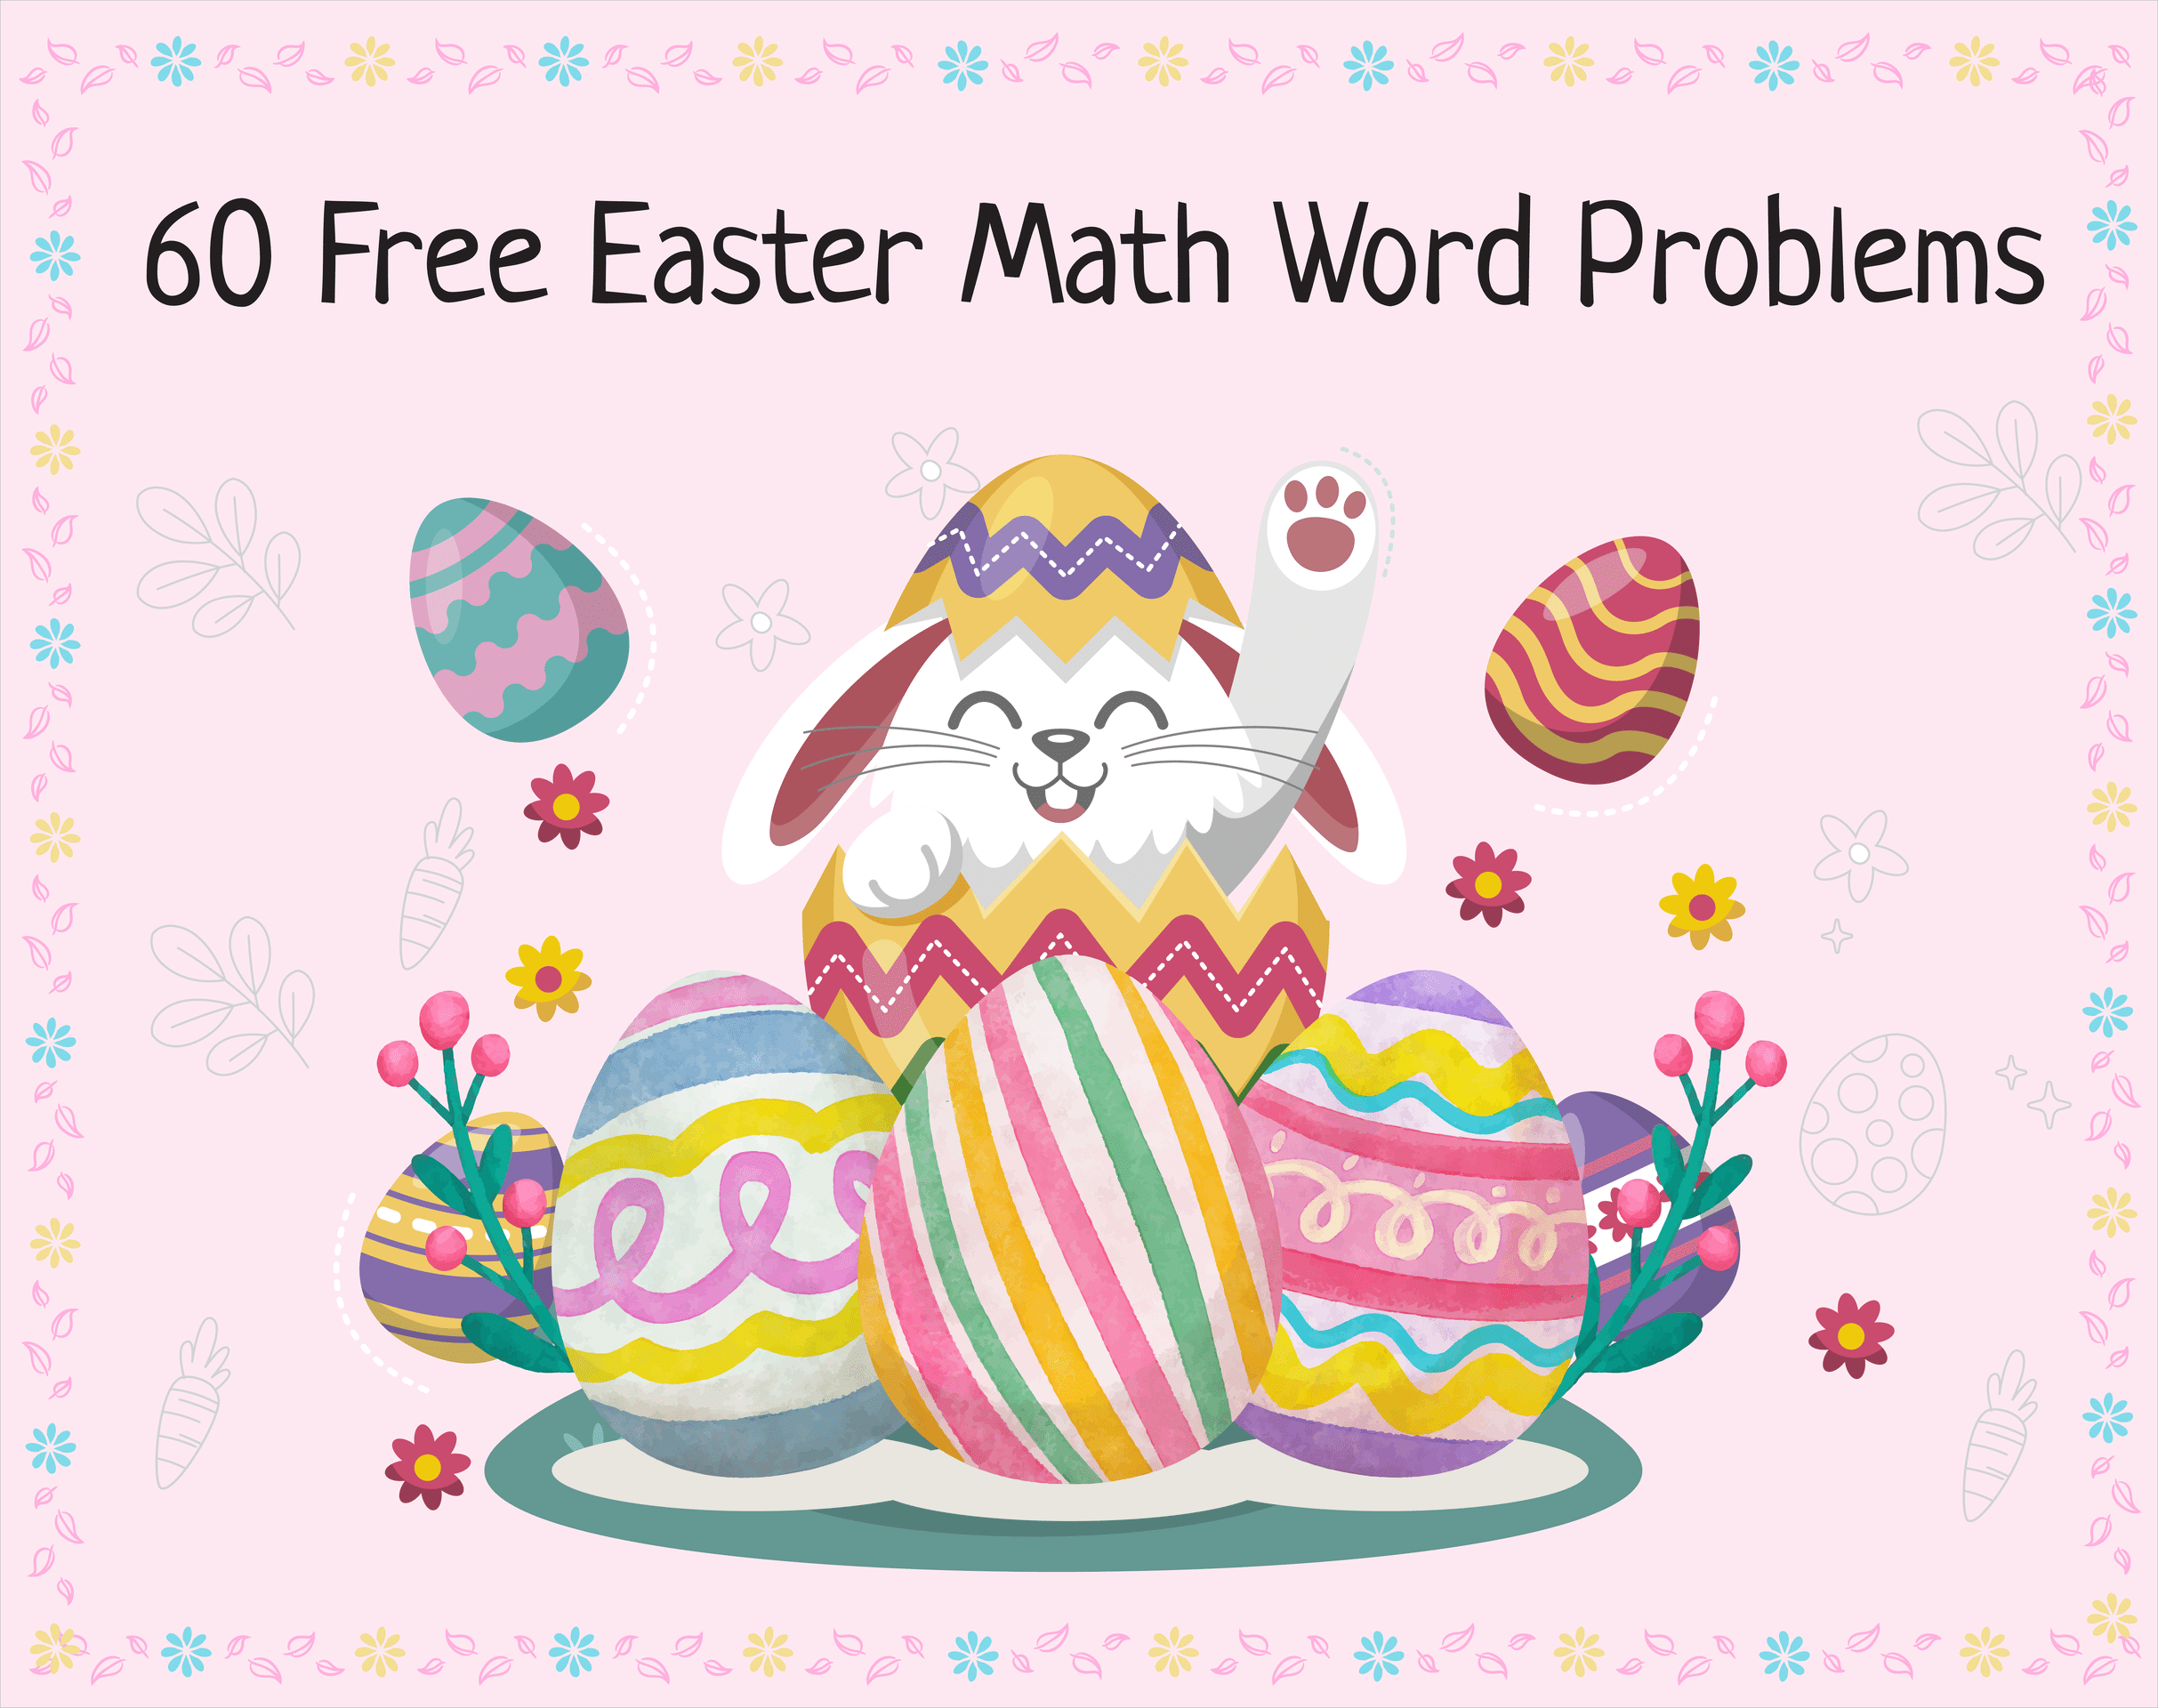 5 Free Easter Math Word Problems Worksheets